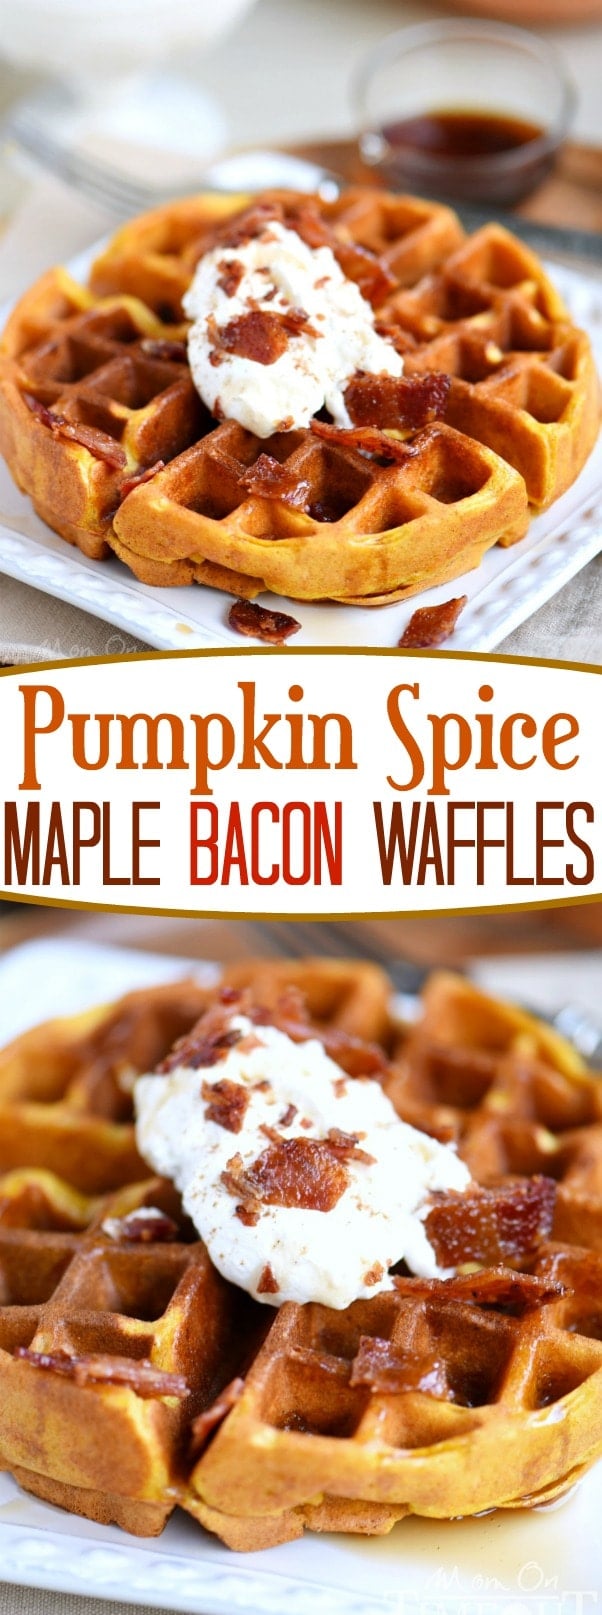 These Pumpkin Spice Maple Bacon Waffles are the perfect way to celebrate the most important meal of the day! Great for the holidays and all fall long! You're going to love the spiced maple bacon that's inside each waffle - so good! // Mom On Timeout (Sponsored by Hungry Jack)